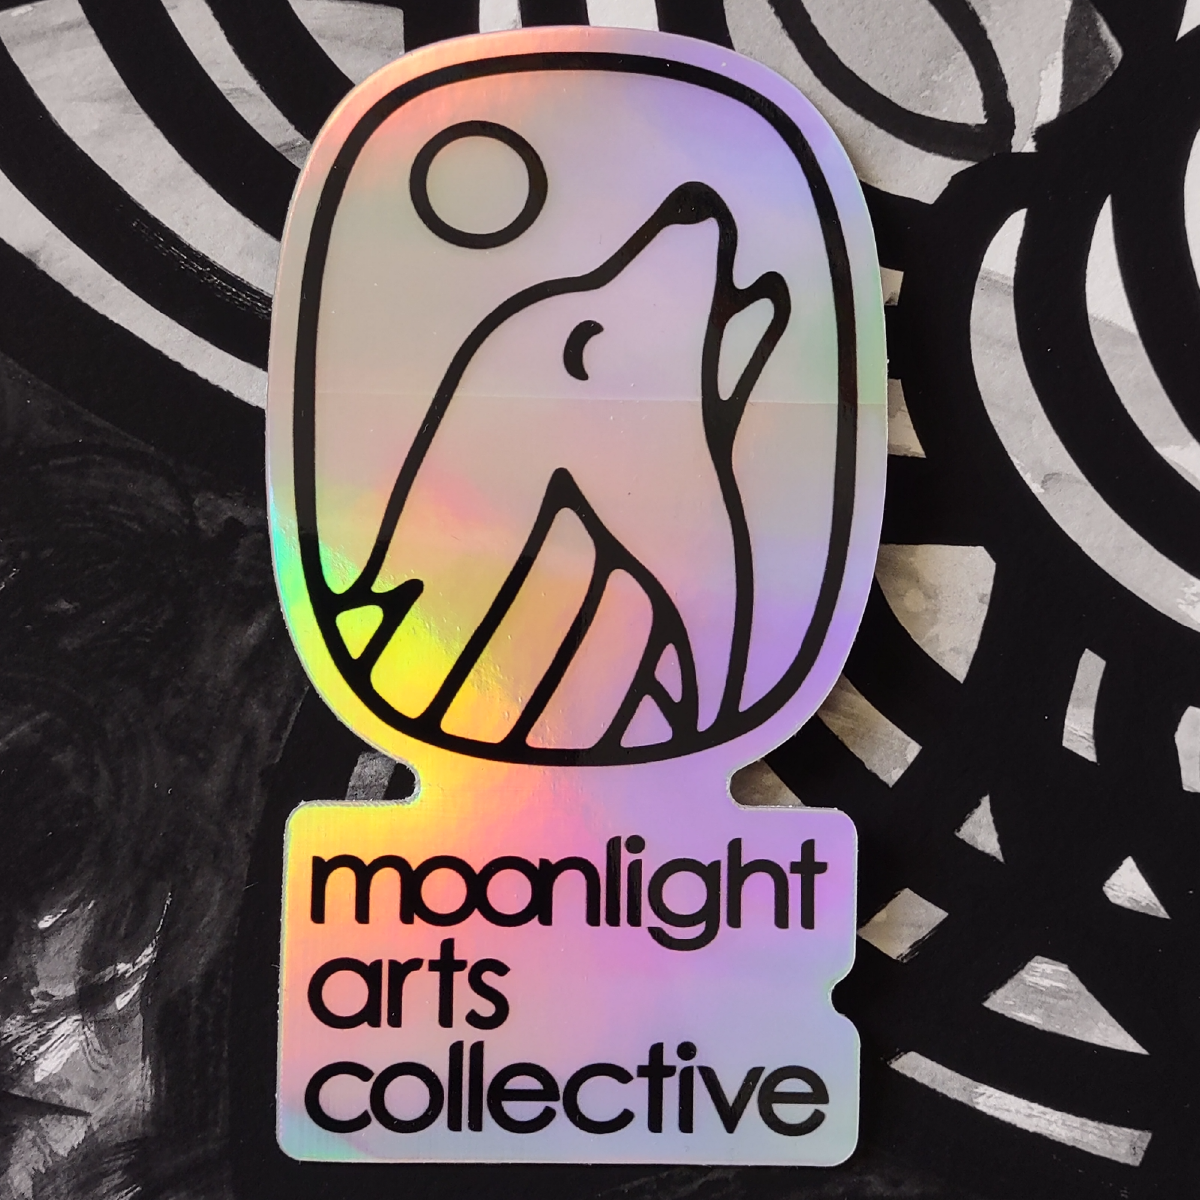 moonlight arts collective - holographic sticker